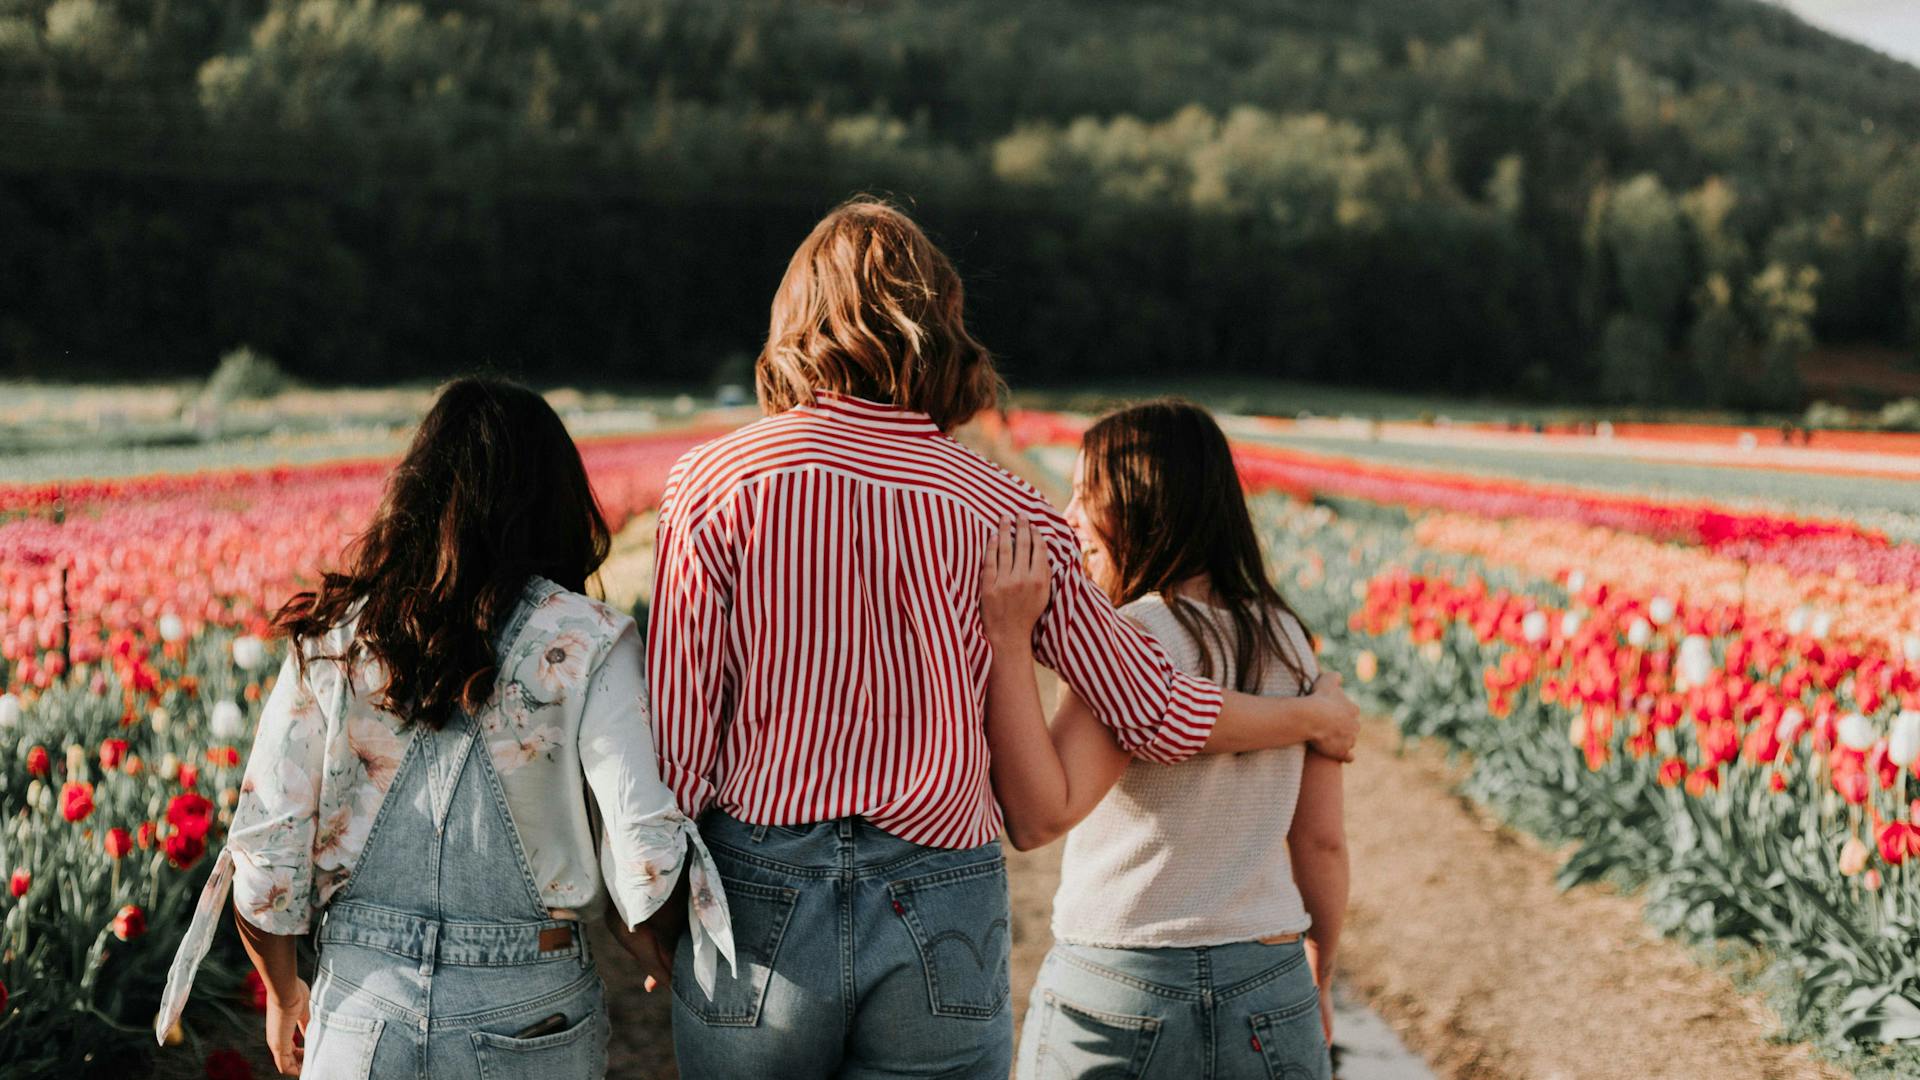 three women walking in a field with red tulips